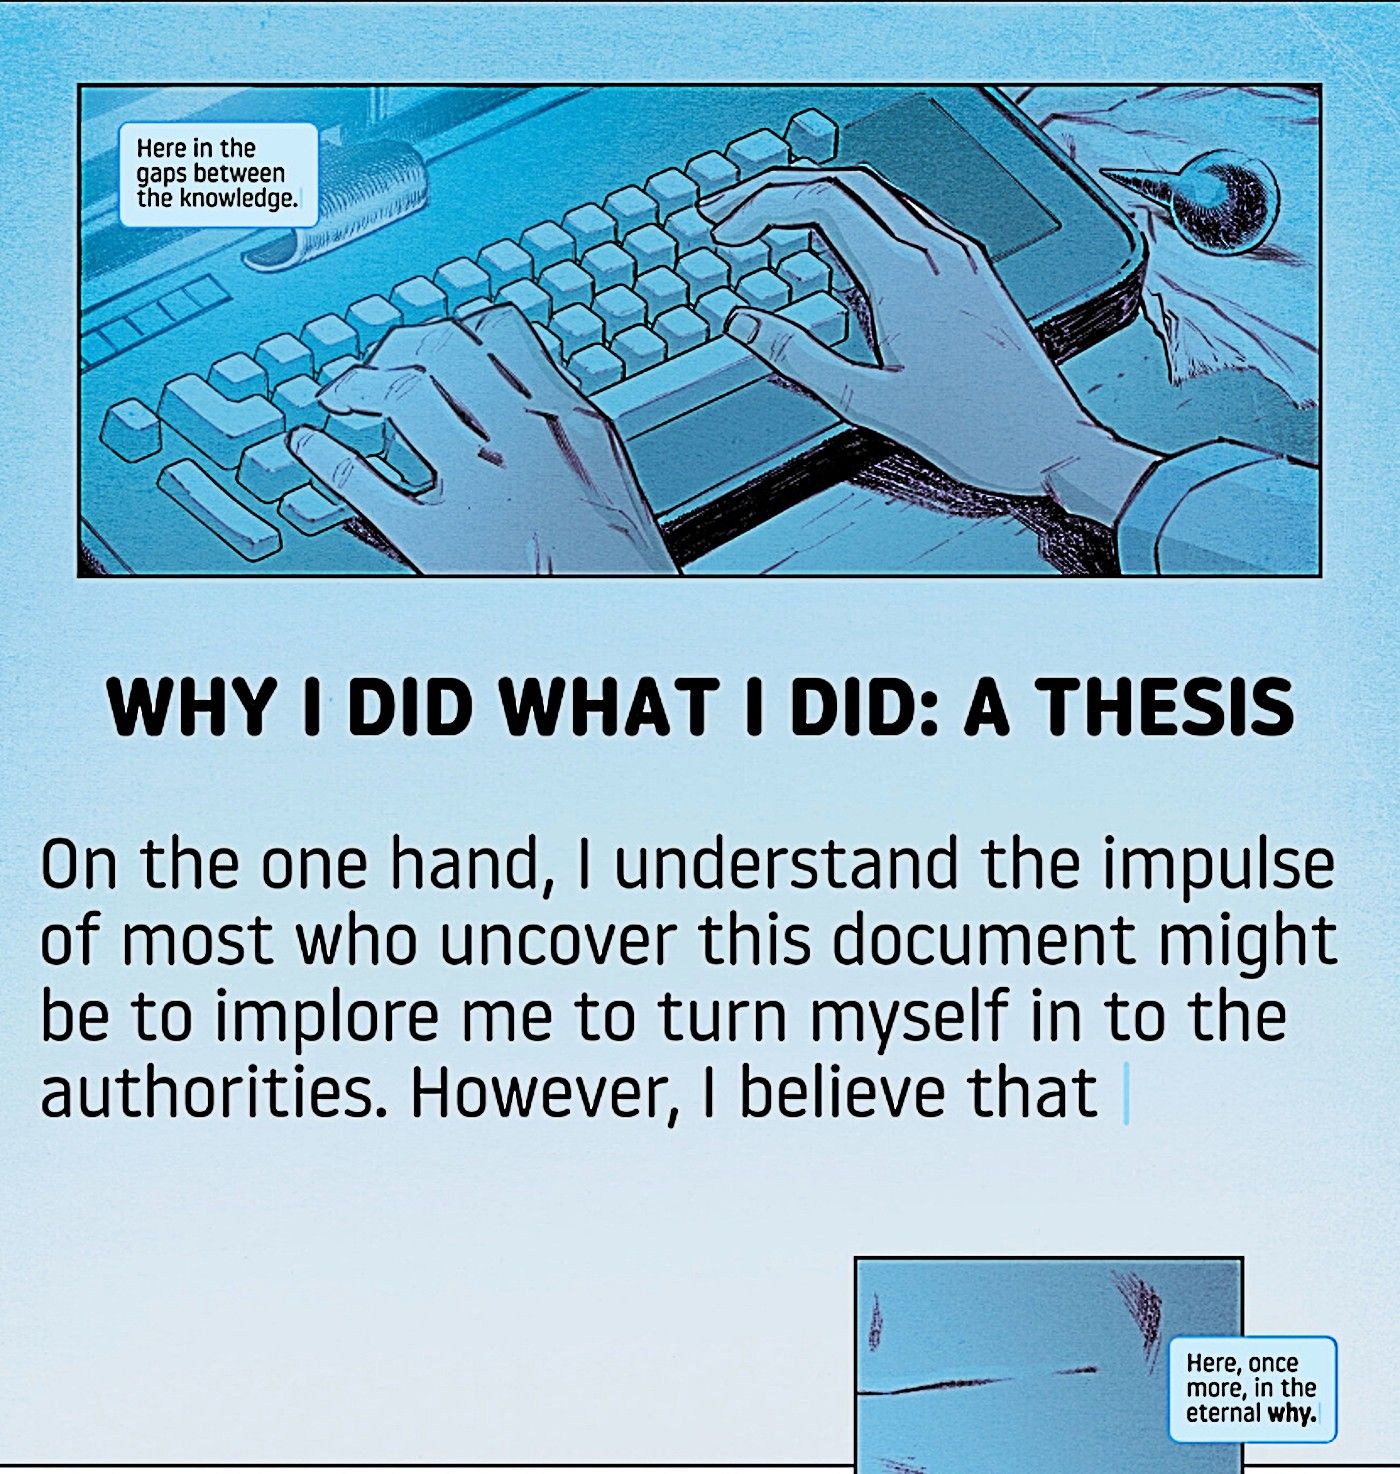 Six Fingers #1, Joe Vale beginnings writing a thesis on the murder he committed